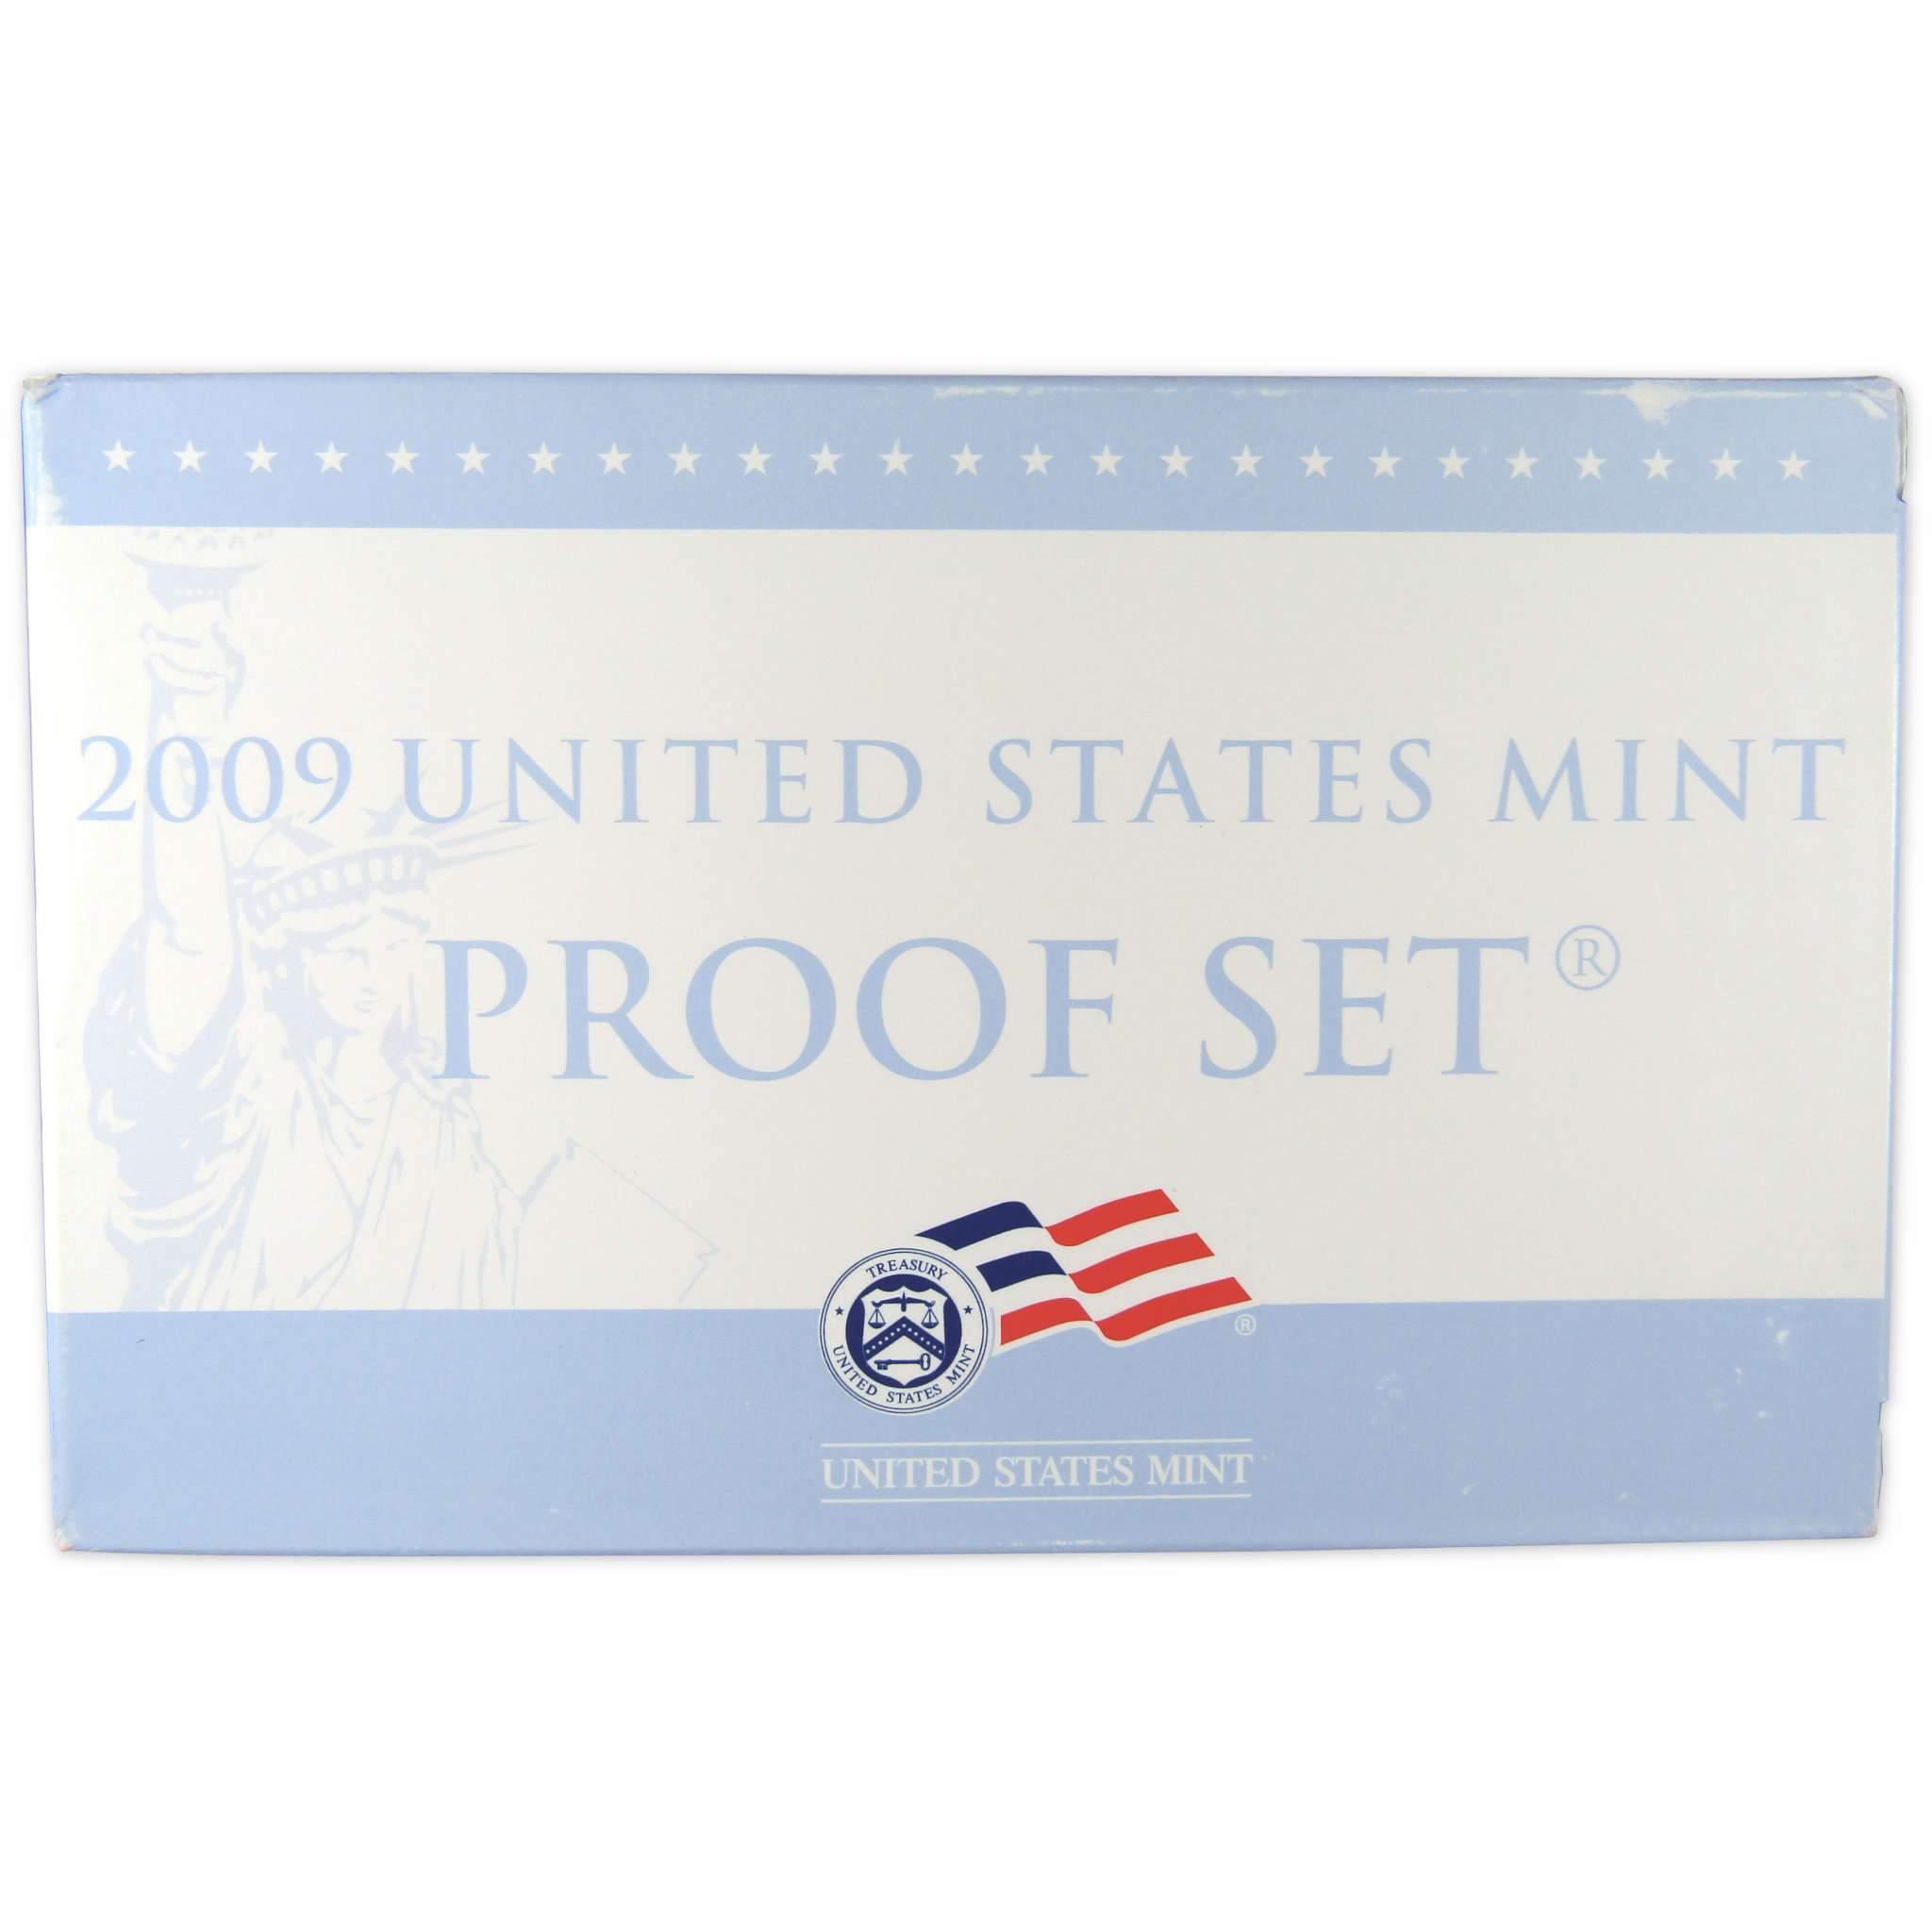 2009 Clad Proof Set U.S. Mint Original Government Packaging OGP Collectible